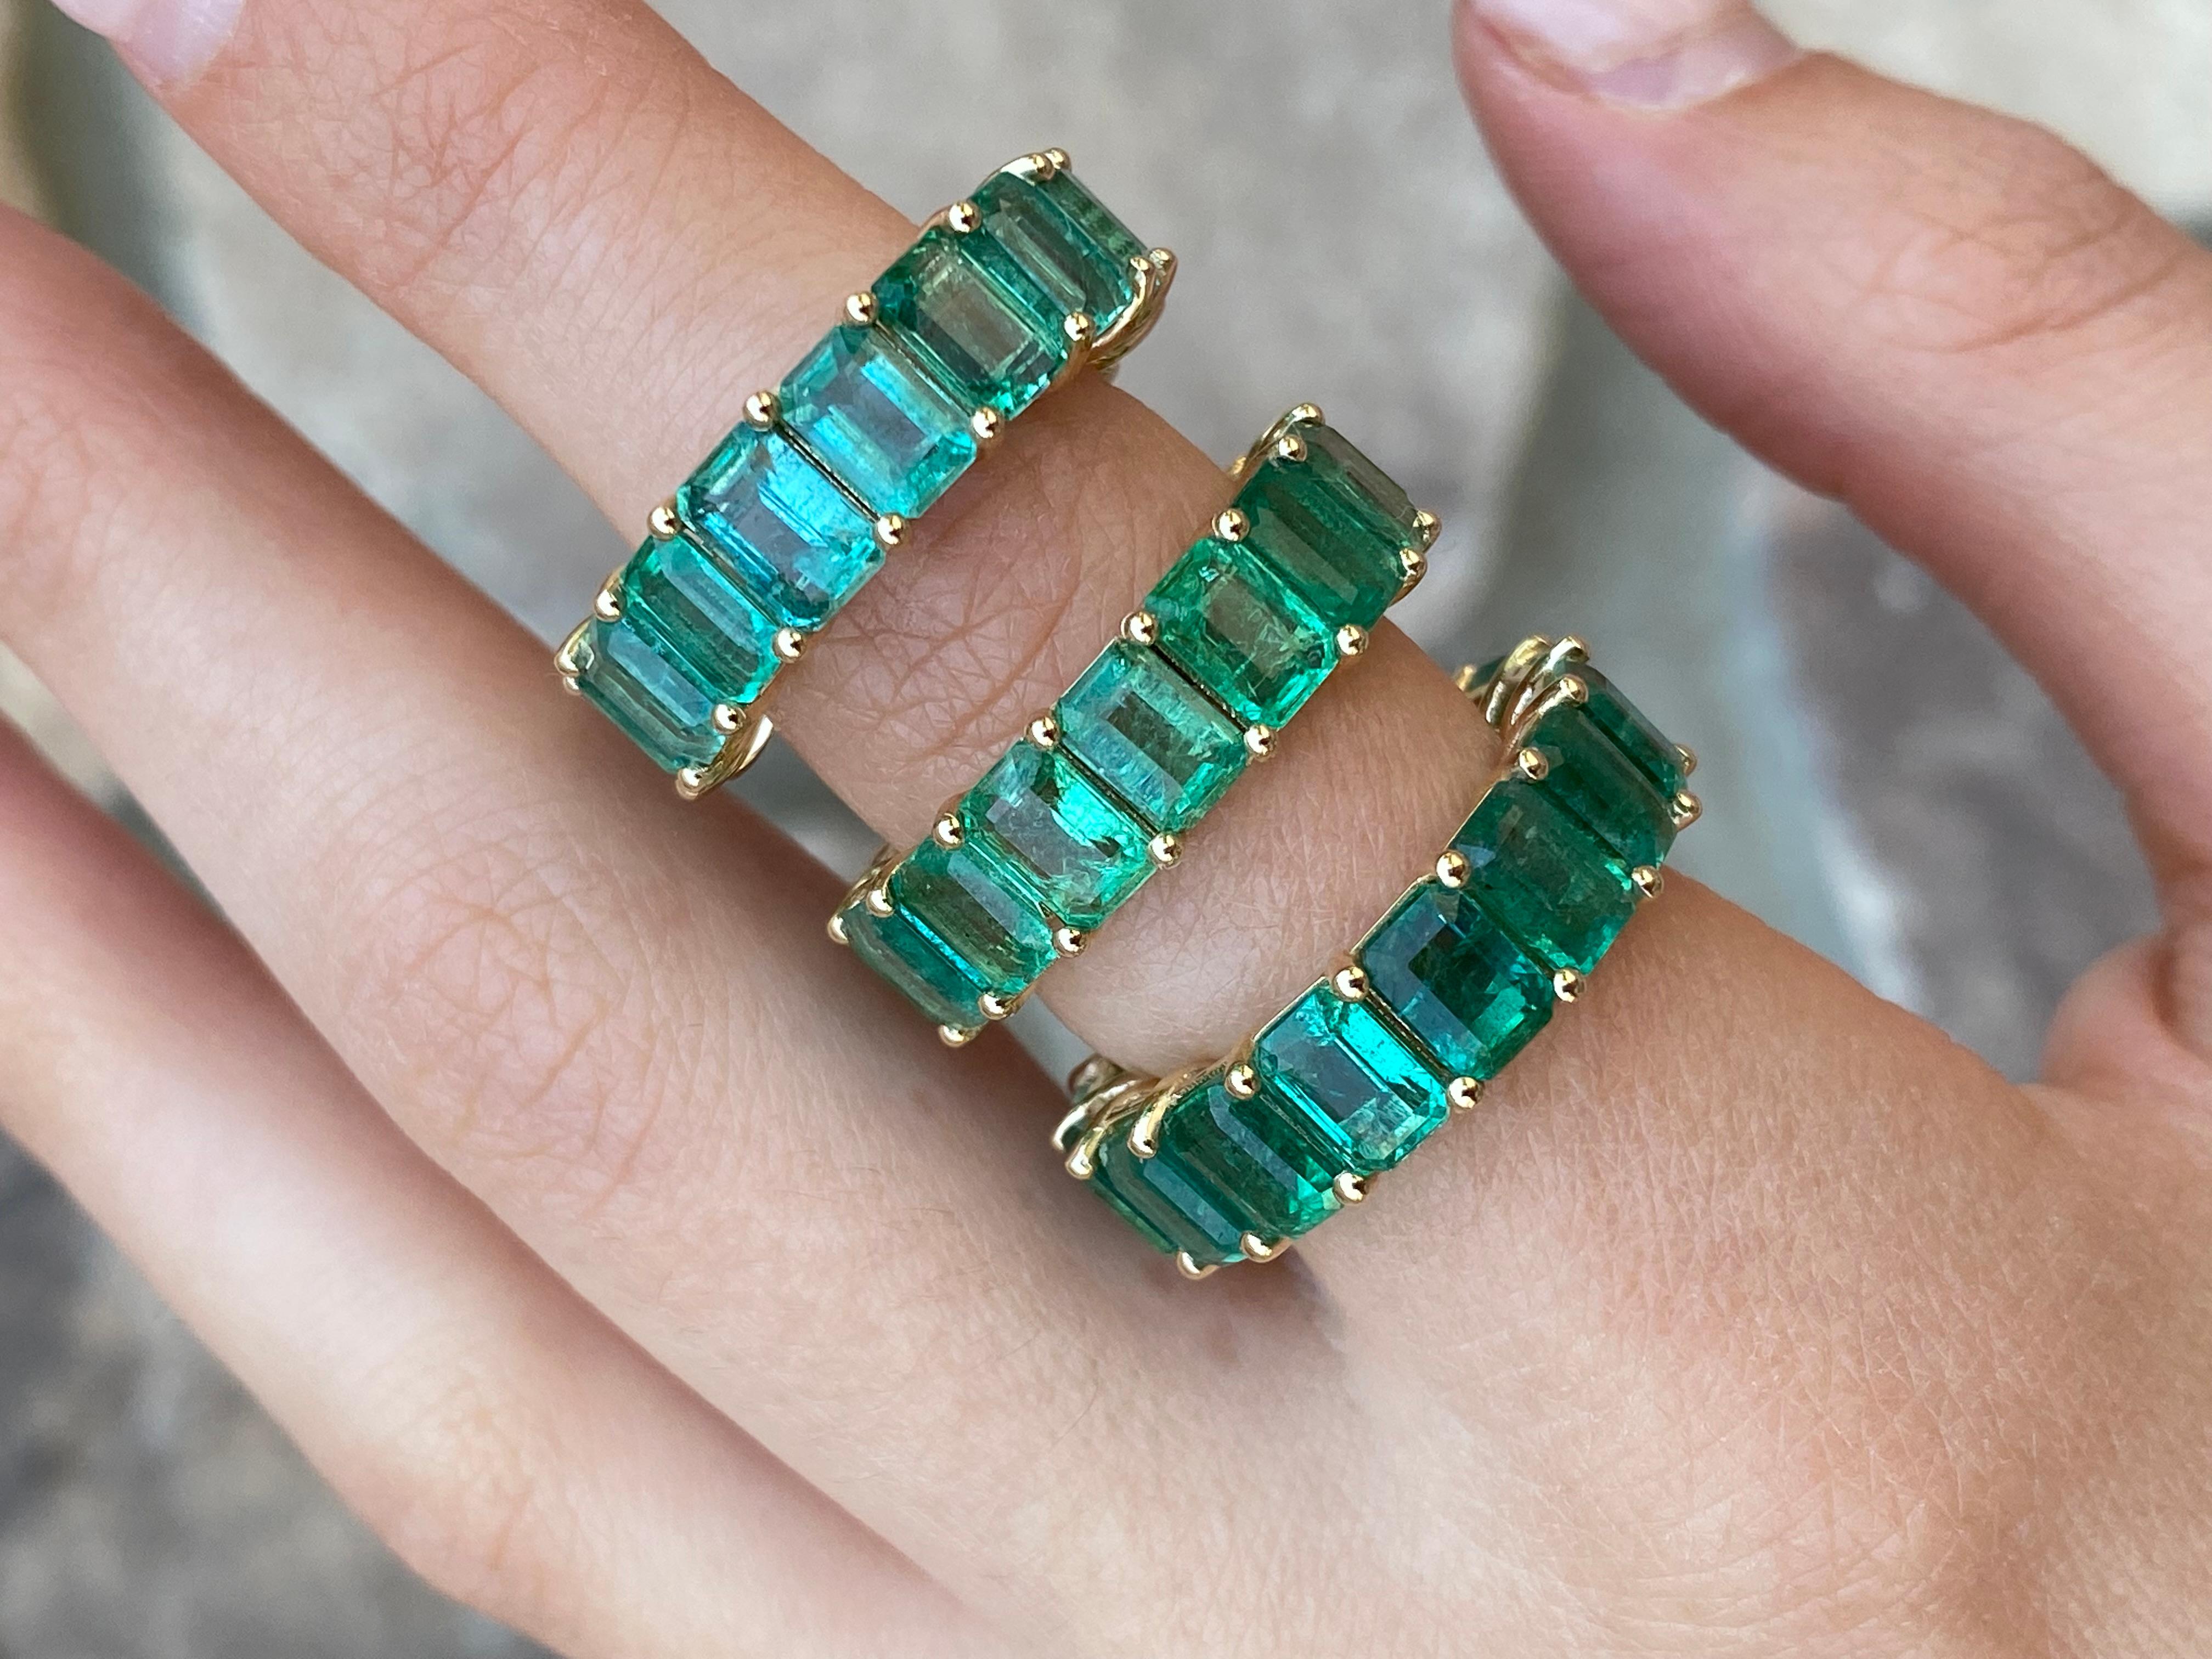 14K yellow gold
approx. 7-10 carats of emerald depending on ring size 
Please allow 6-8 weeks production for custom sizing